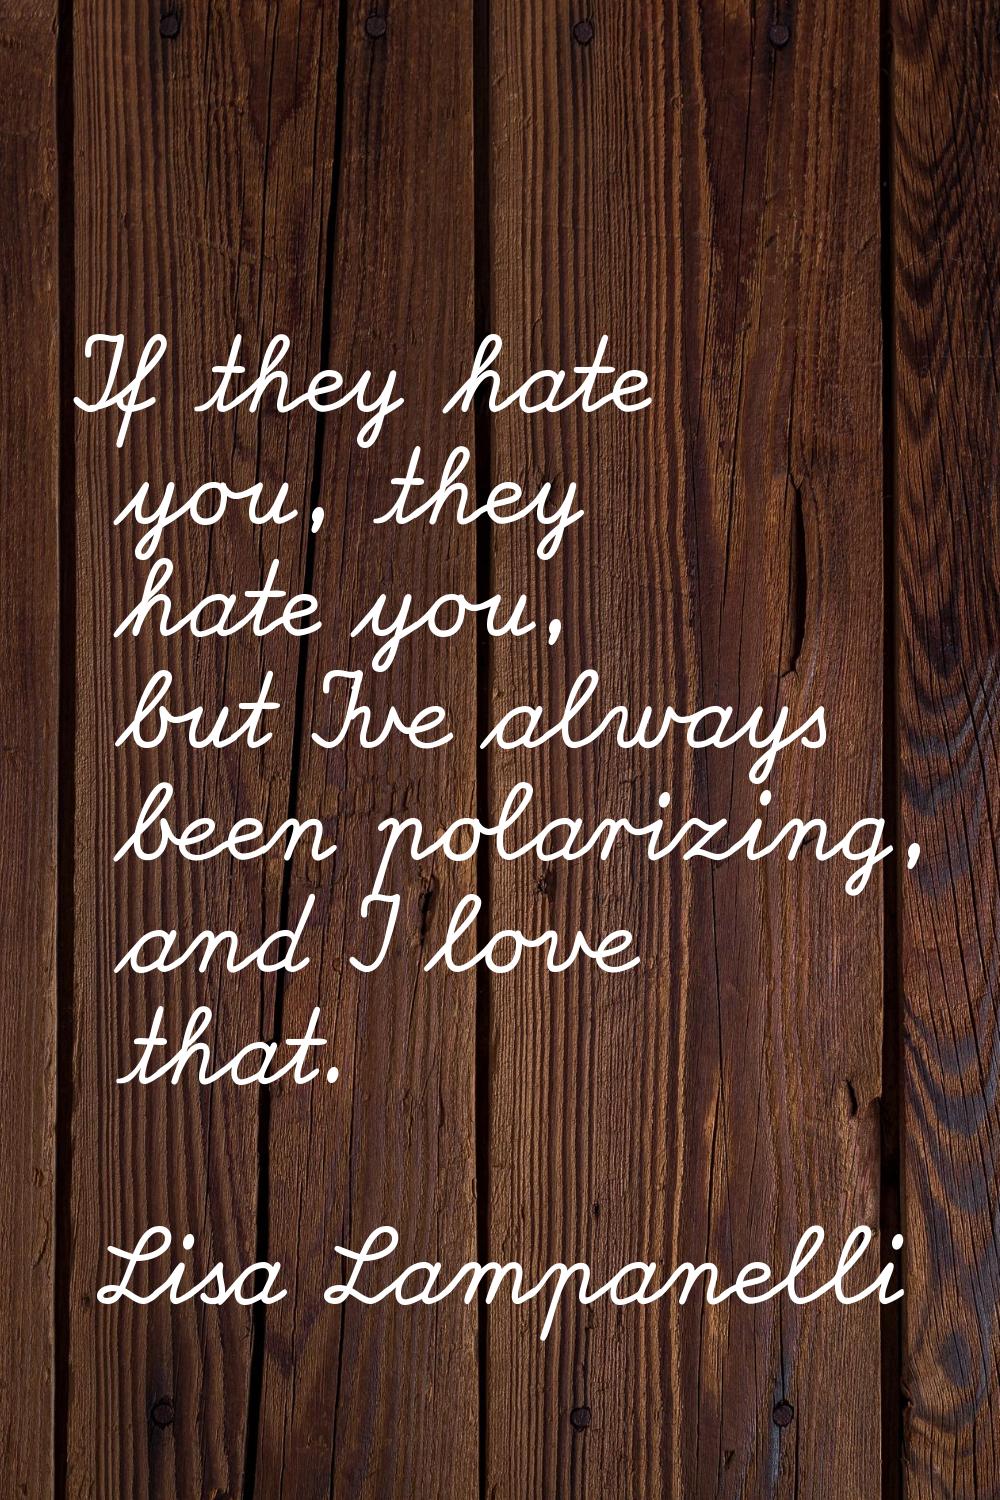 If they hate you, they hate you, but I've always been polarizing, and I love that.